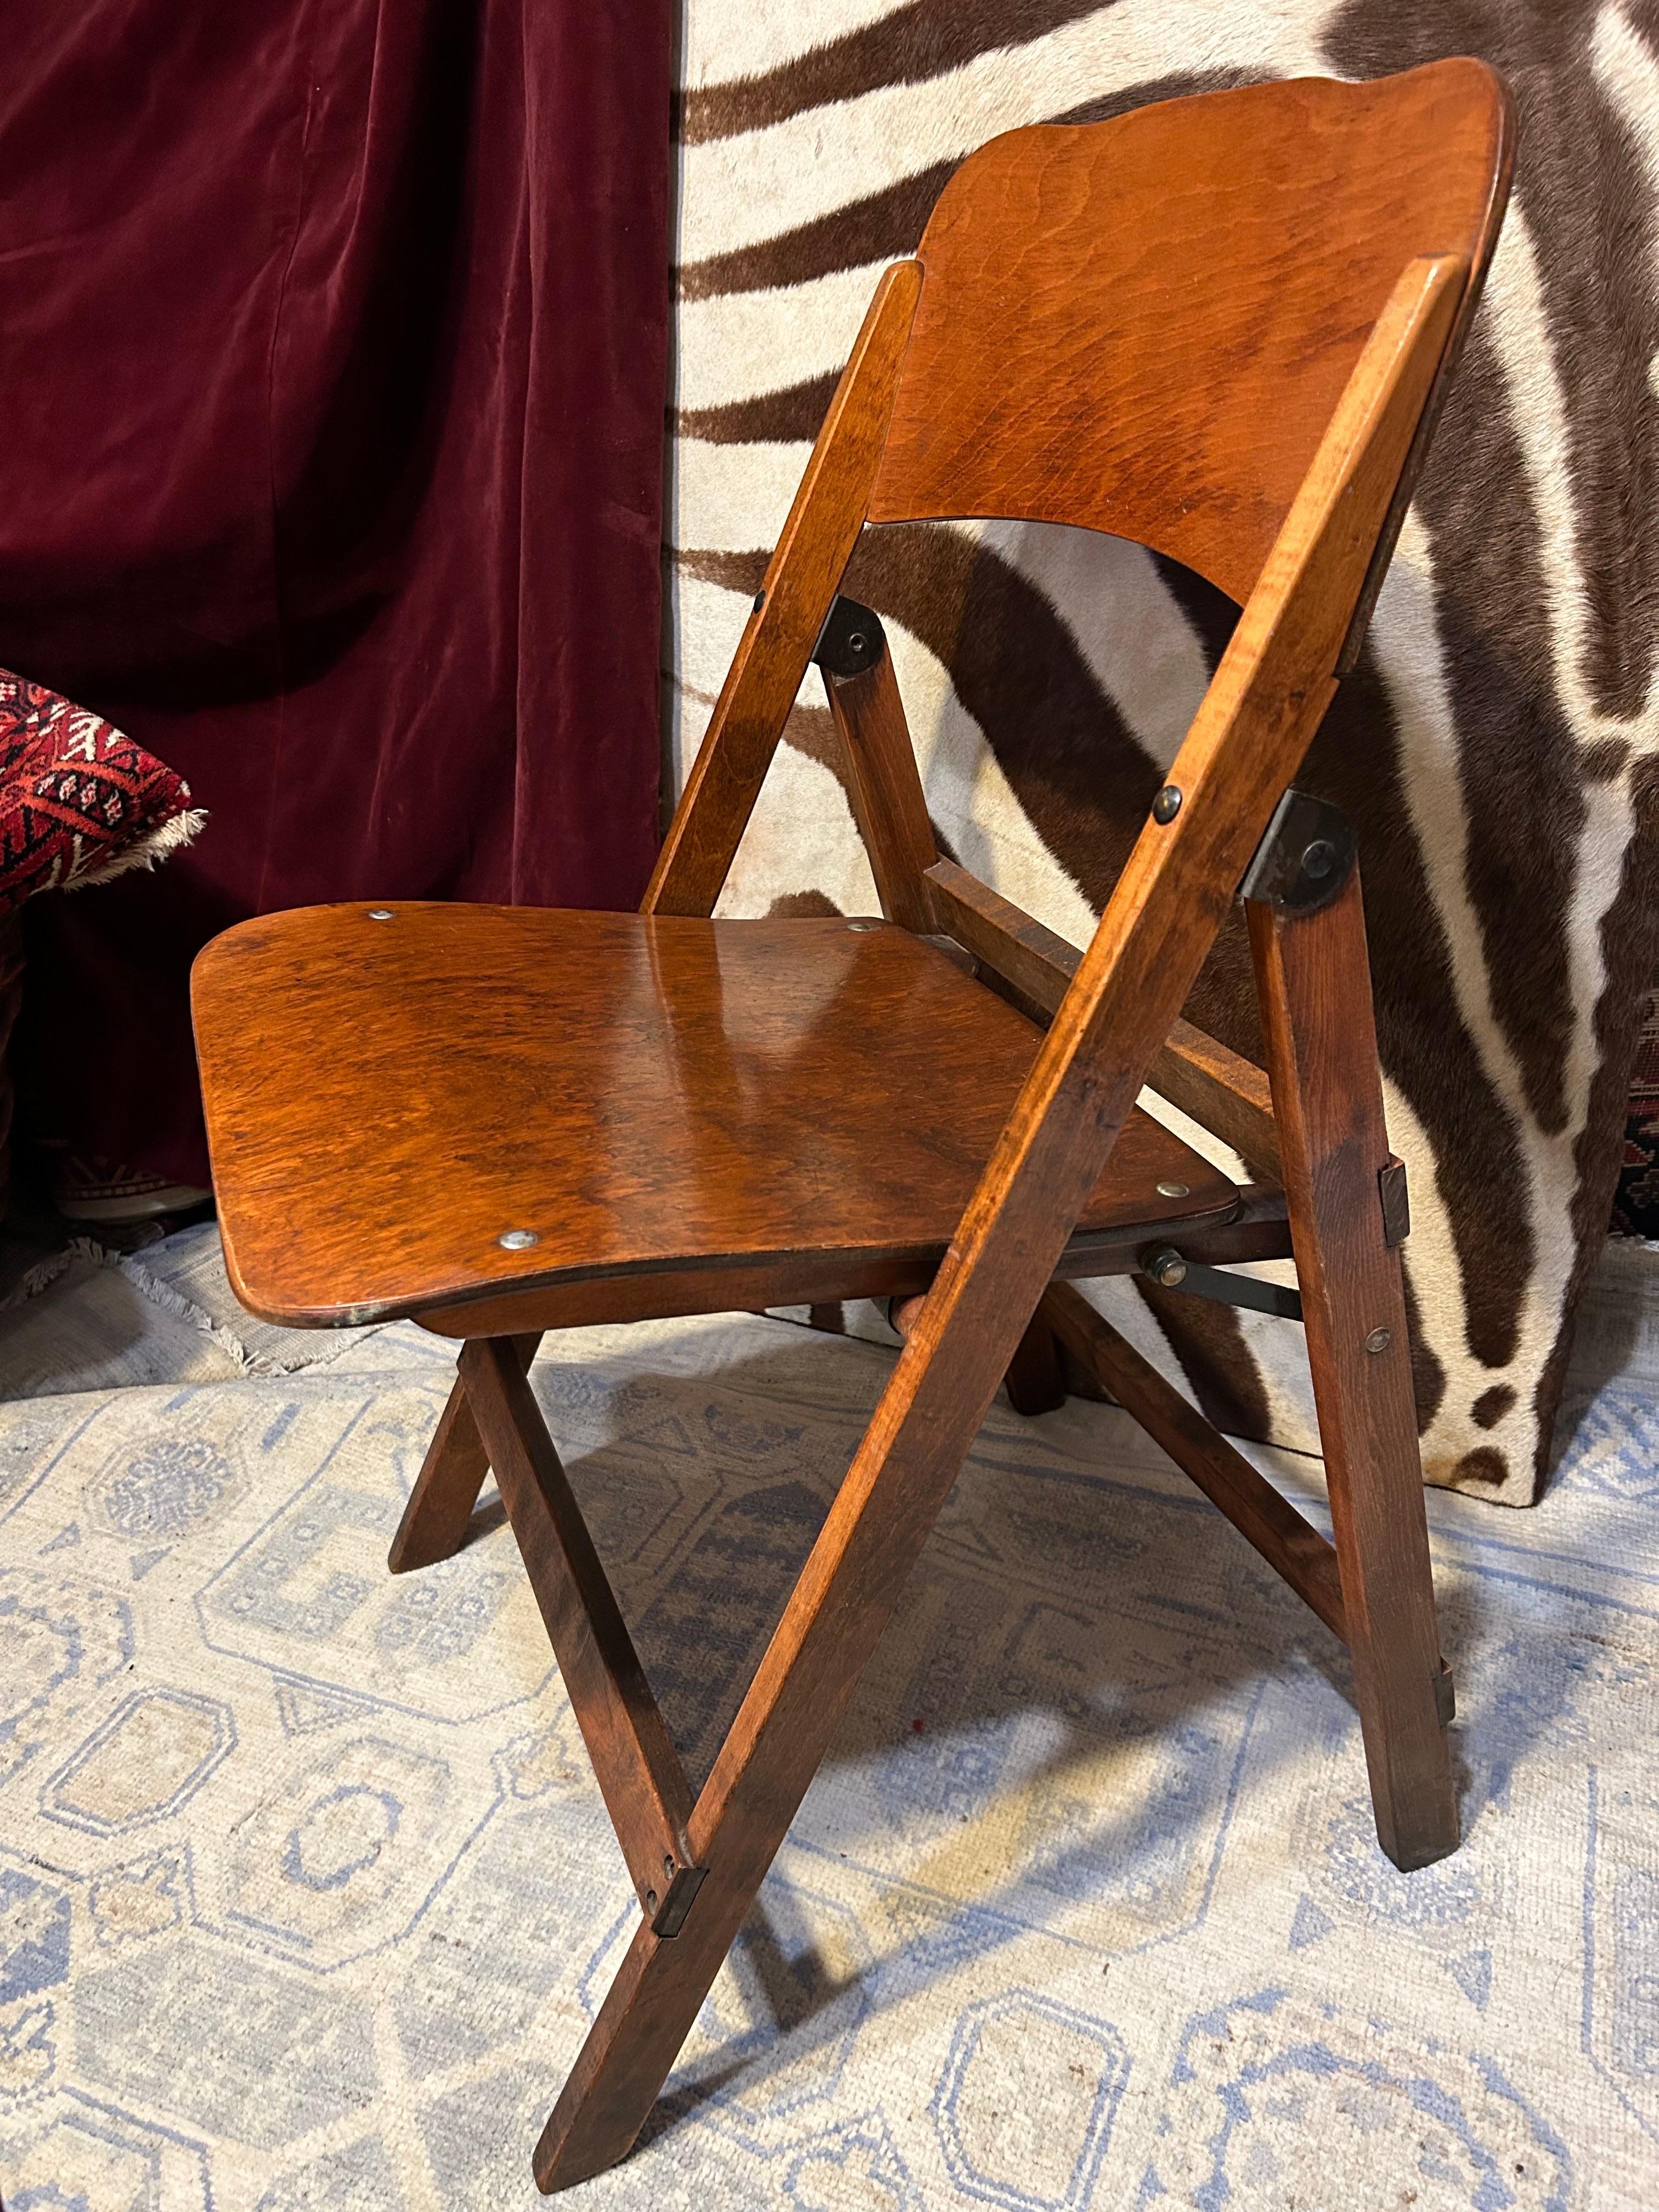 Solid, beautifully conceived folding Campaign chair with excellent attention to detail. Metal rivets and pivot hardware intact and functioning smoothly. this chair will take use as it is sturdy and functional while exuding old world splendour. The